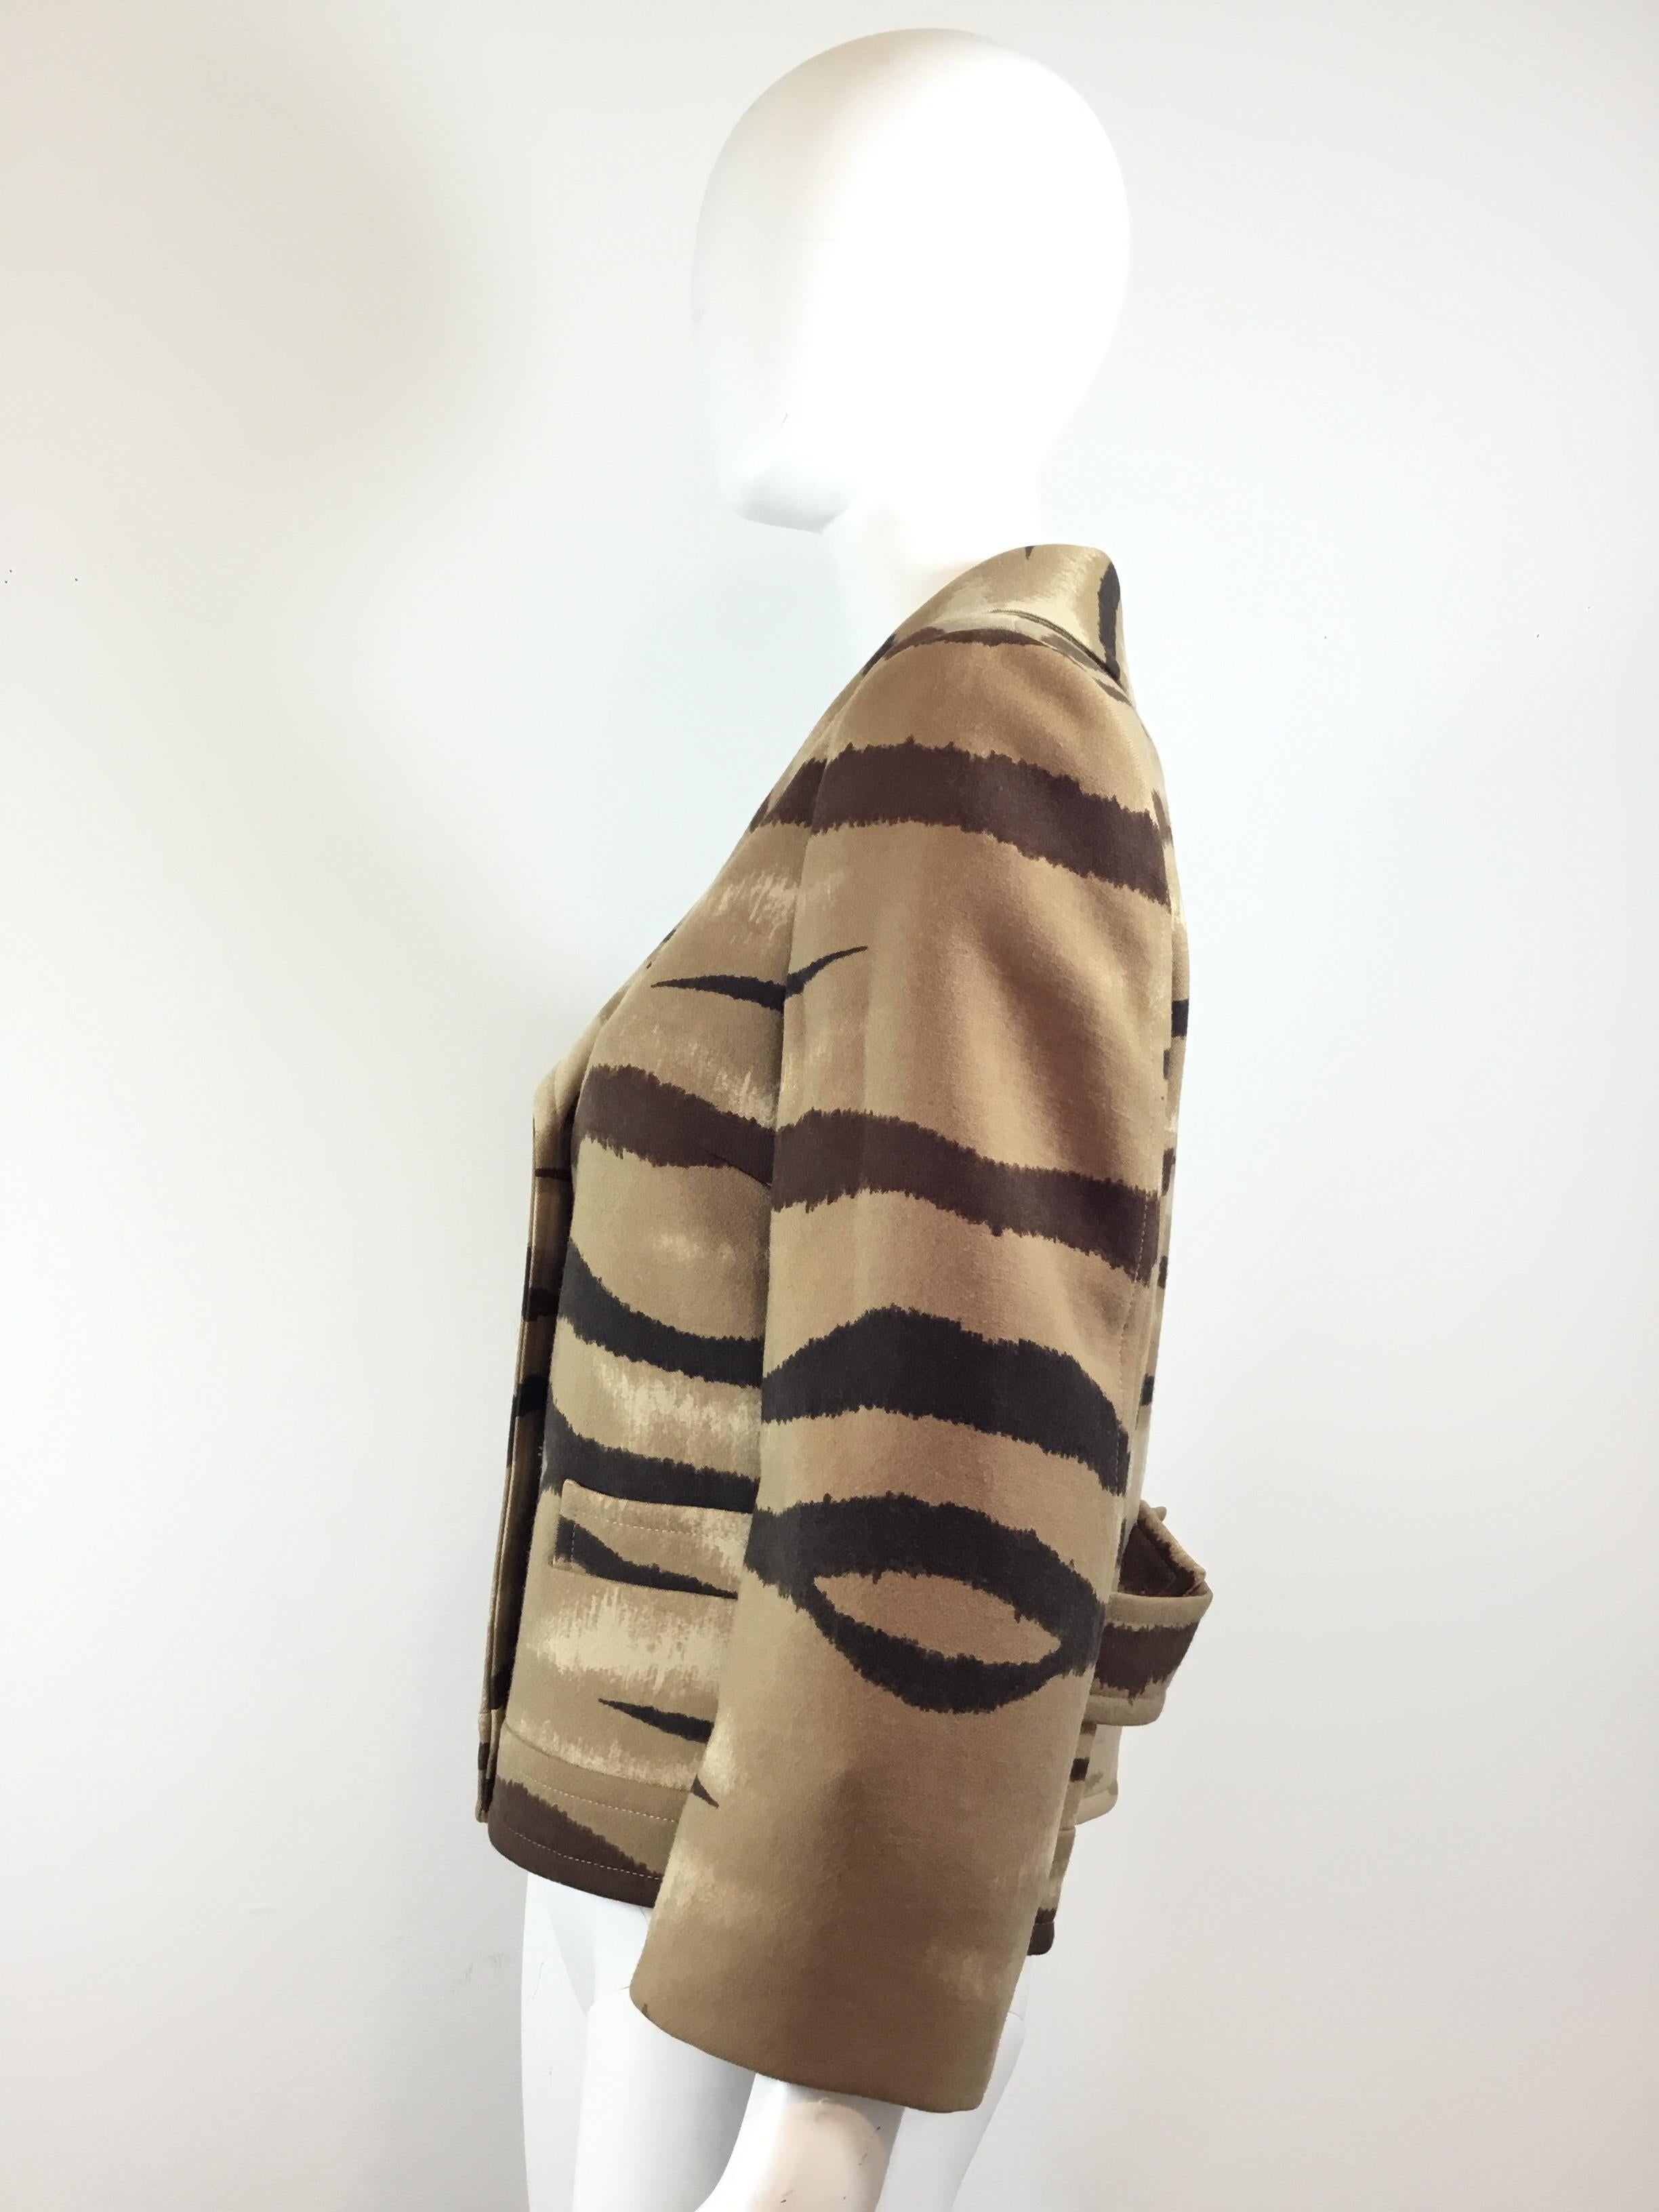 Valentino brown/tan zebra print blazer with button closures and a full lining. Blazer is a size 46, made in Italy. 100% wool.
Excellent condition.

Bust 40''
Sleeves 20''
Length 22''